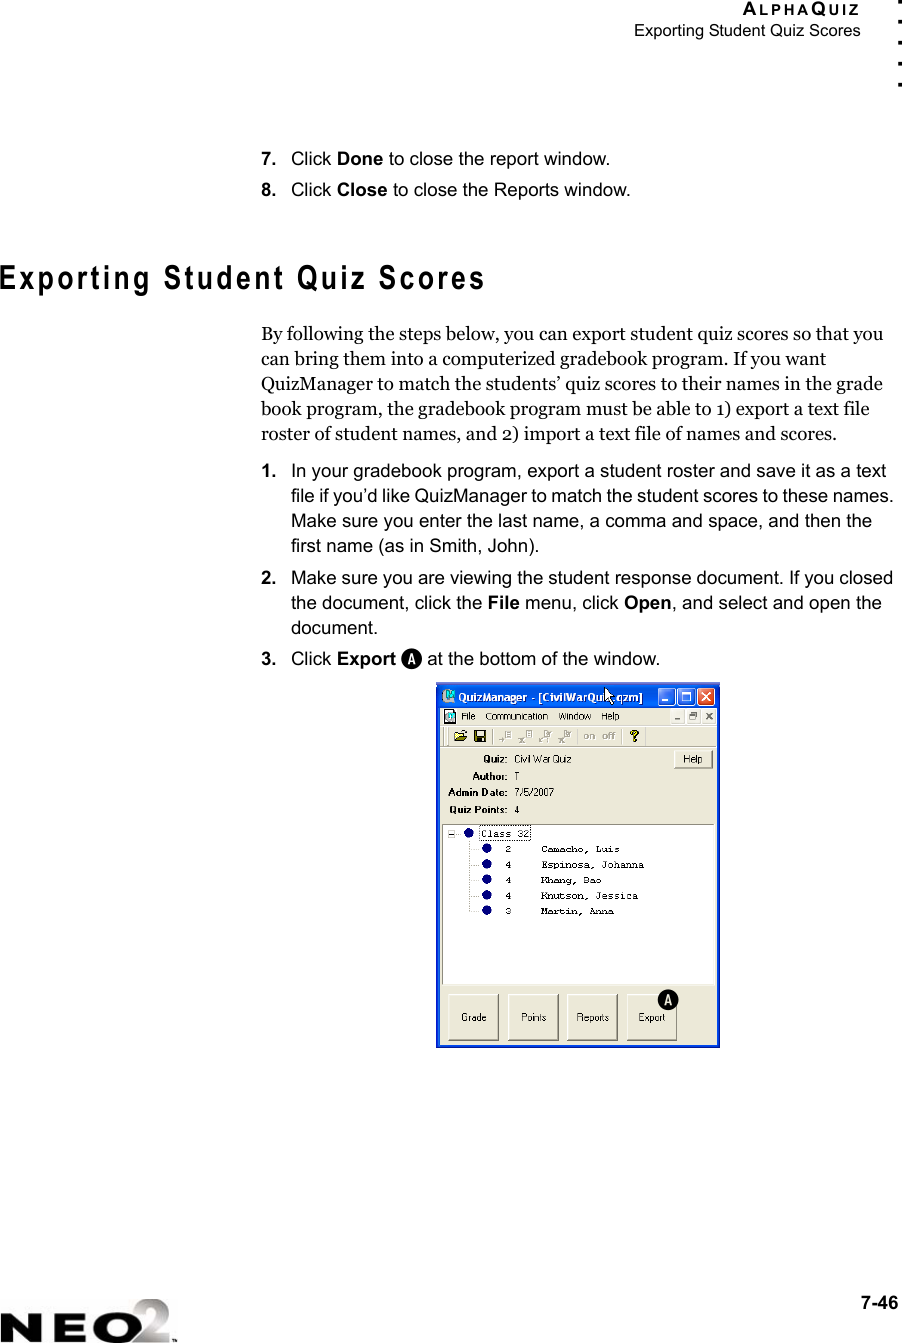 ALPHAQUIZExporting Student Quiz Scores7-46. . . . .7. Click Done to close the report window.8. Click Close to close the Reports window.Exporting Student Quiz ScoresBy following the steps below, you can export student quiz scores so that you can bring them into a computerized gradebook program. If you want QuizManager to match the students’ quiz scores to their names in the grade book program, the gradebook program must be able to 1) export a text file roster of student names, and 2) import a text file of names and scores.1. In your gradebook program, export a student roster and save it as a text file if you’d like QuizManager to match the student scores to these names. Make sure you enter the last name, a comma and space, and then the first name (as in Smith, John).2. Make sure you are viewing the student response document. If you closed the document, click the File menu, click Open, and select and open the document. 3. Click Export A at the bottom of the window.A